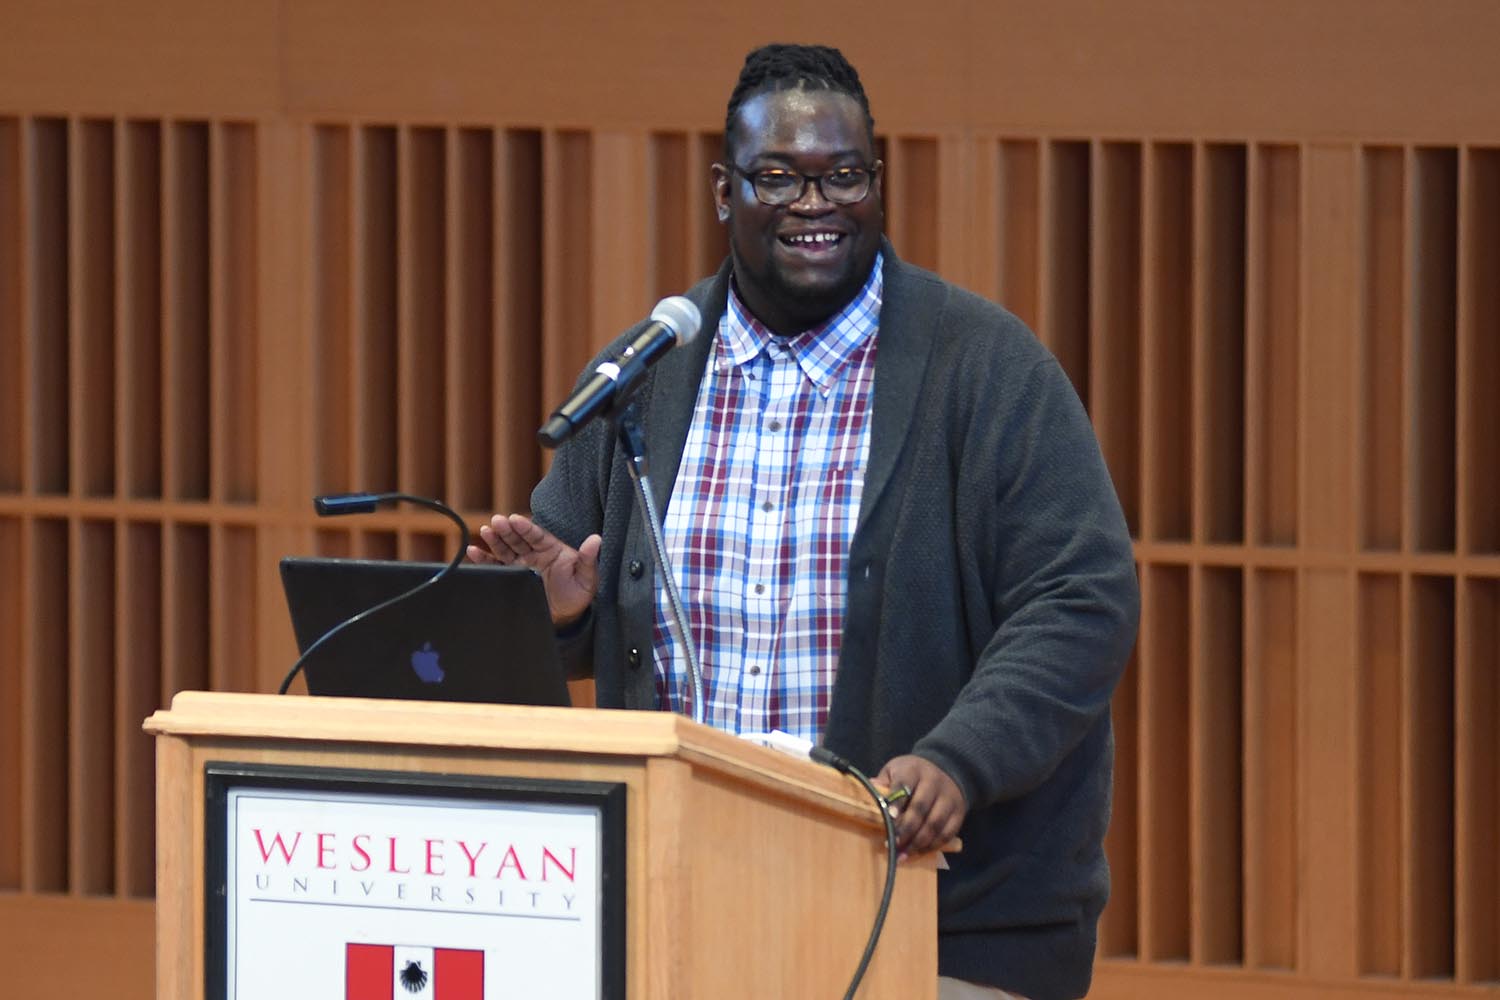 Demetrius Colvin, director of Wesleyan’s Resource Center, welcomed the audience on behalf of the MLK Commemoration Committee. Colvin is the chair of the committee. 